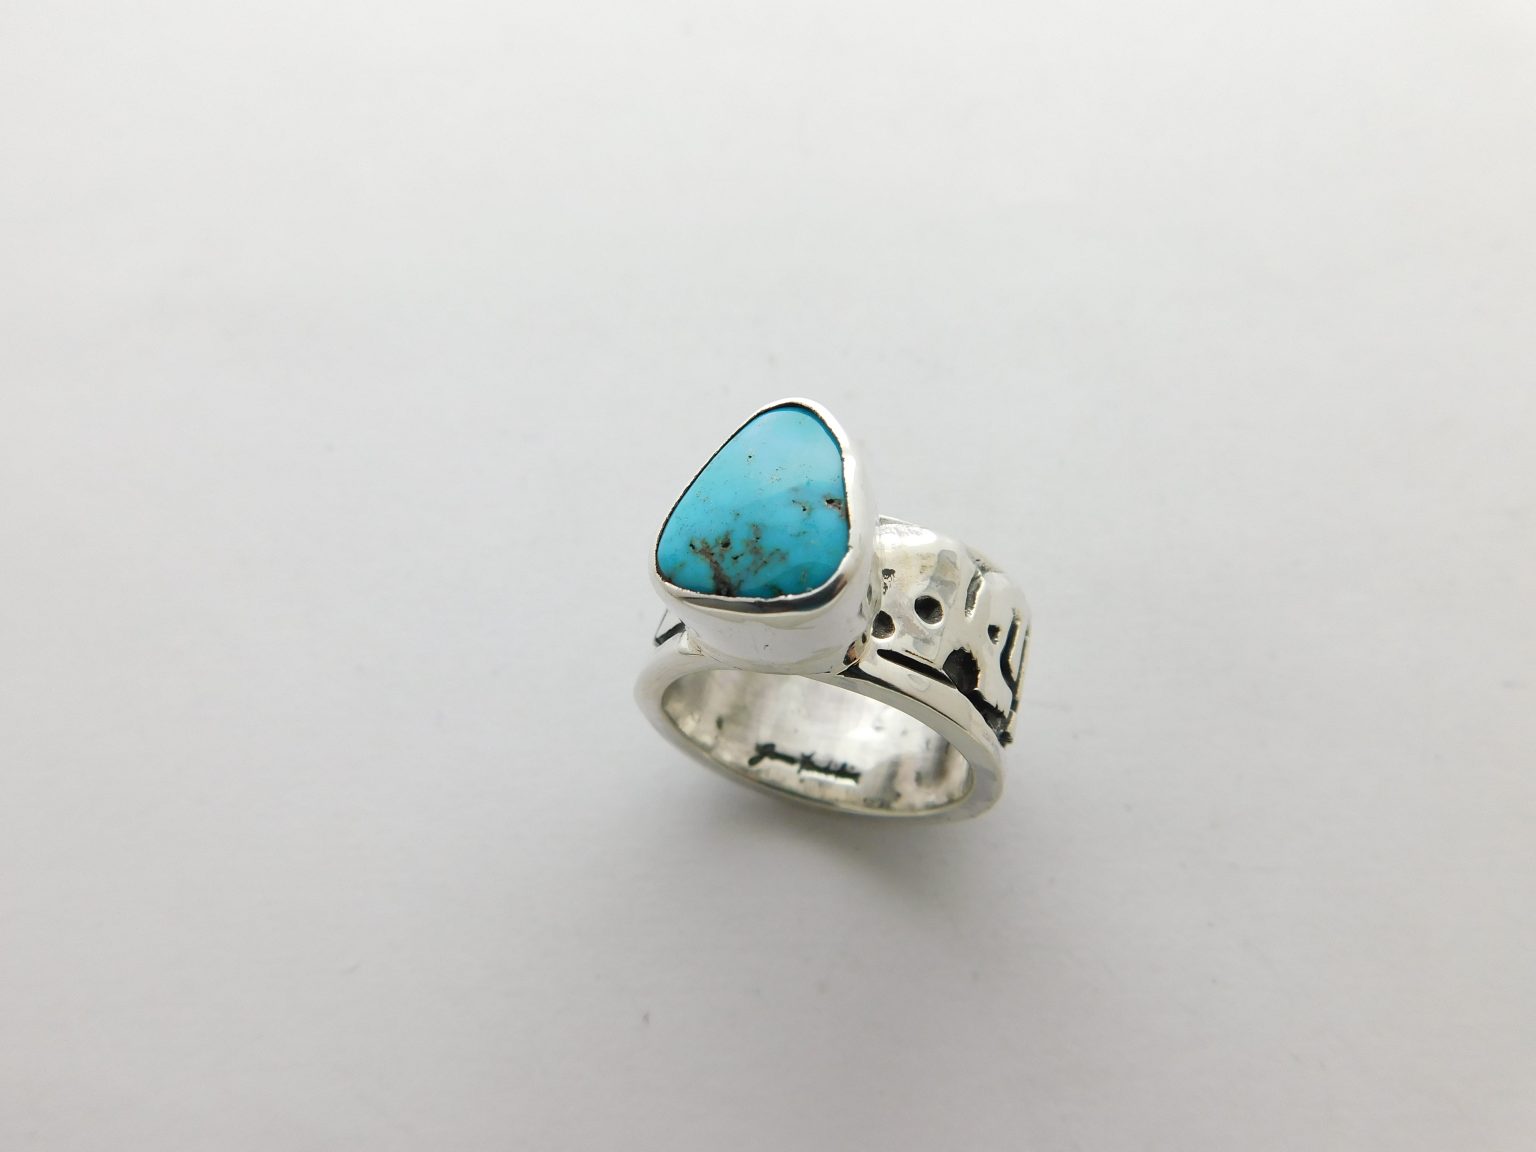 James Fendenheim Tohono O'odham Bisbee Turquoise and Sterling Silver Ring